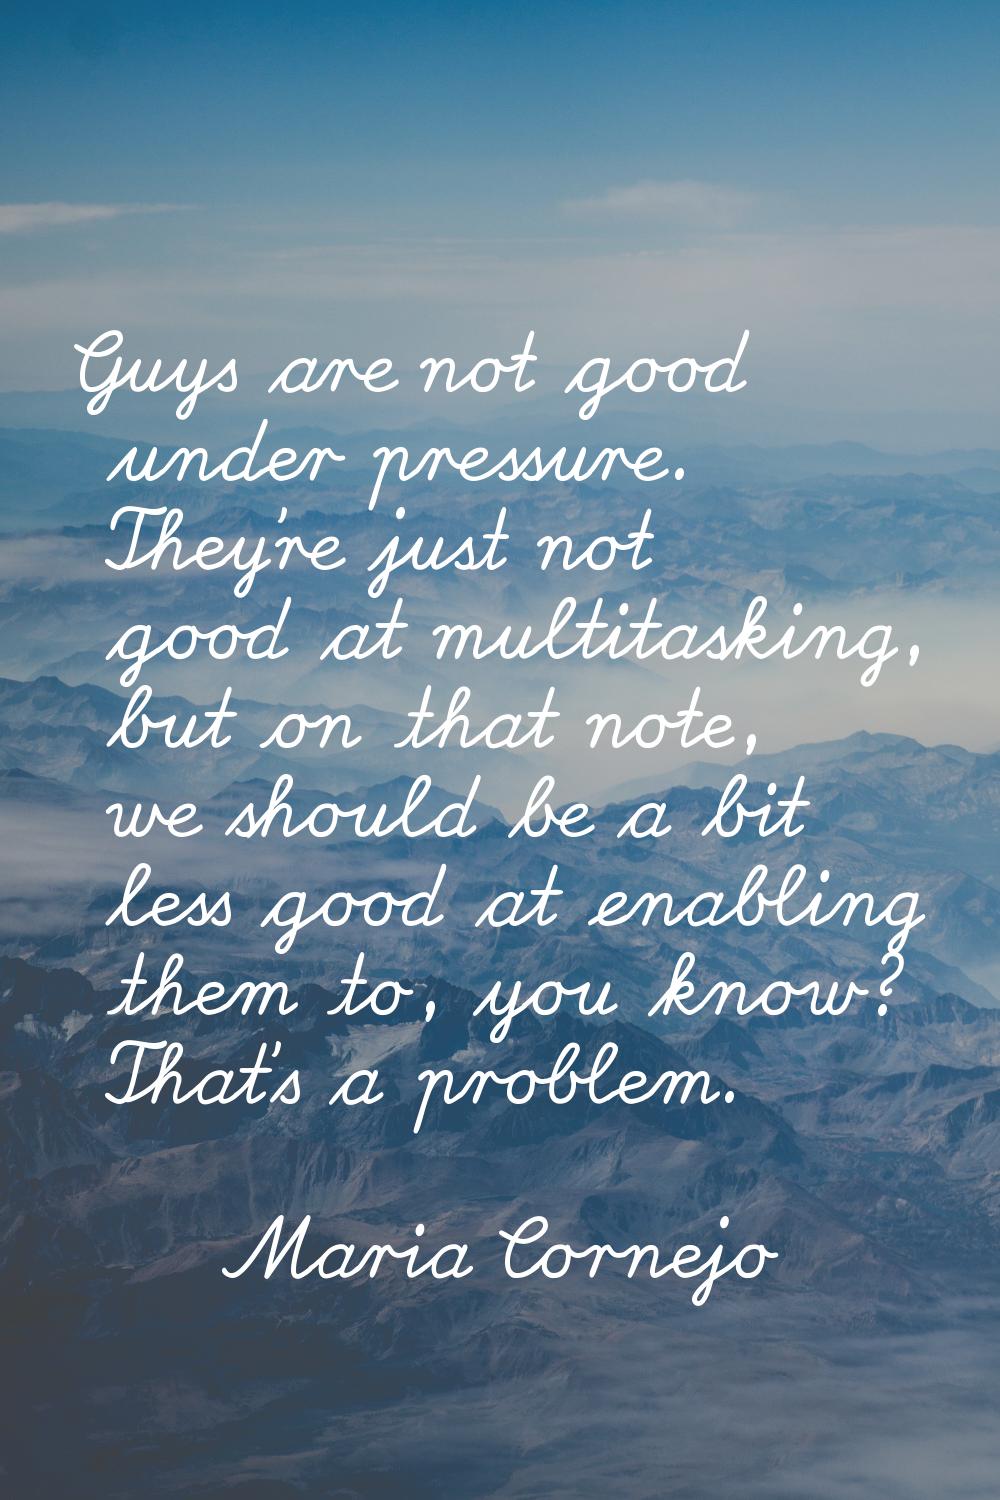 Guys are not good under pressure. They're just not good at multitasking, but on that note, we shoul